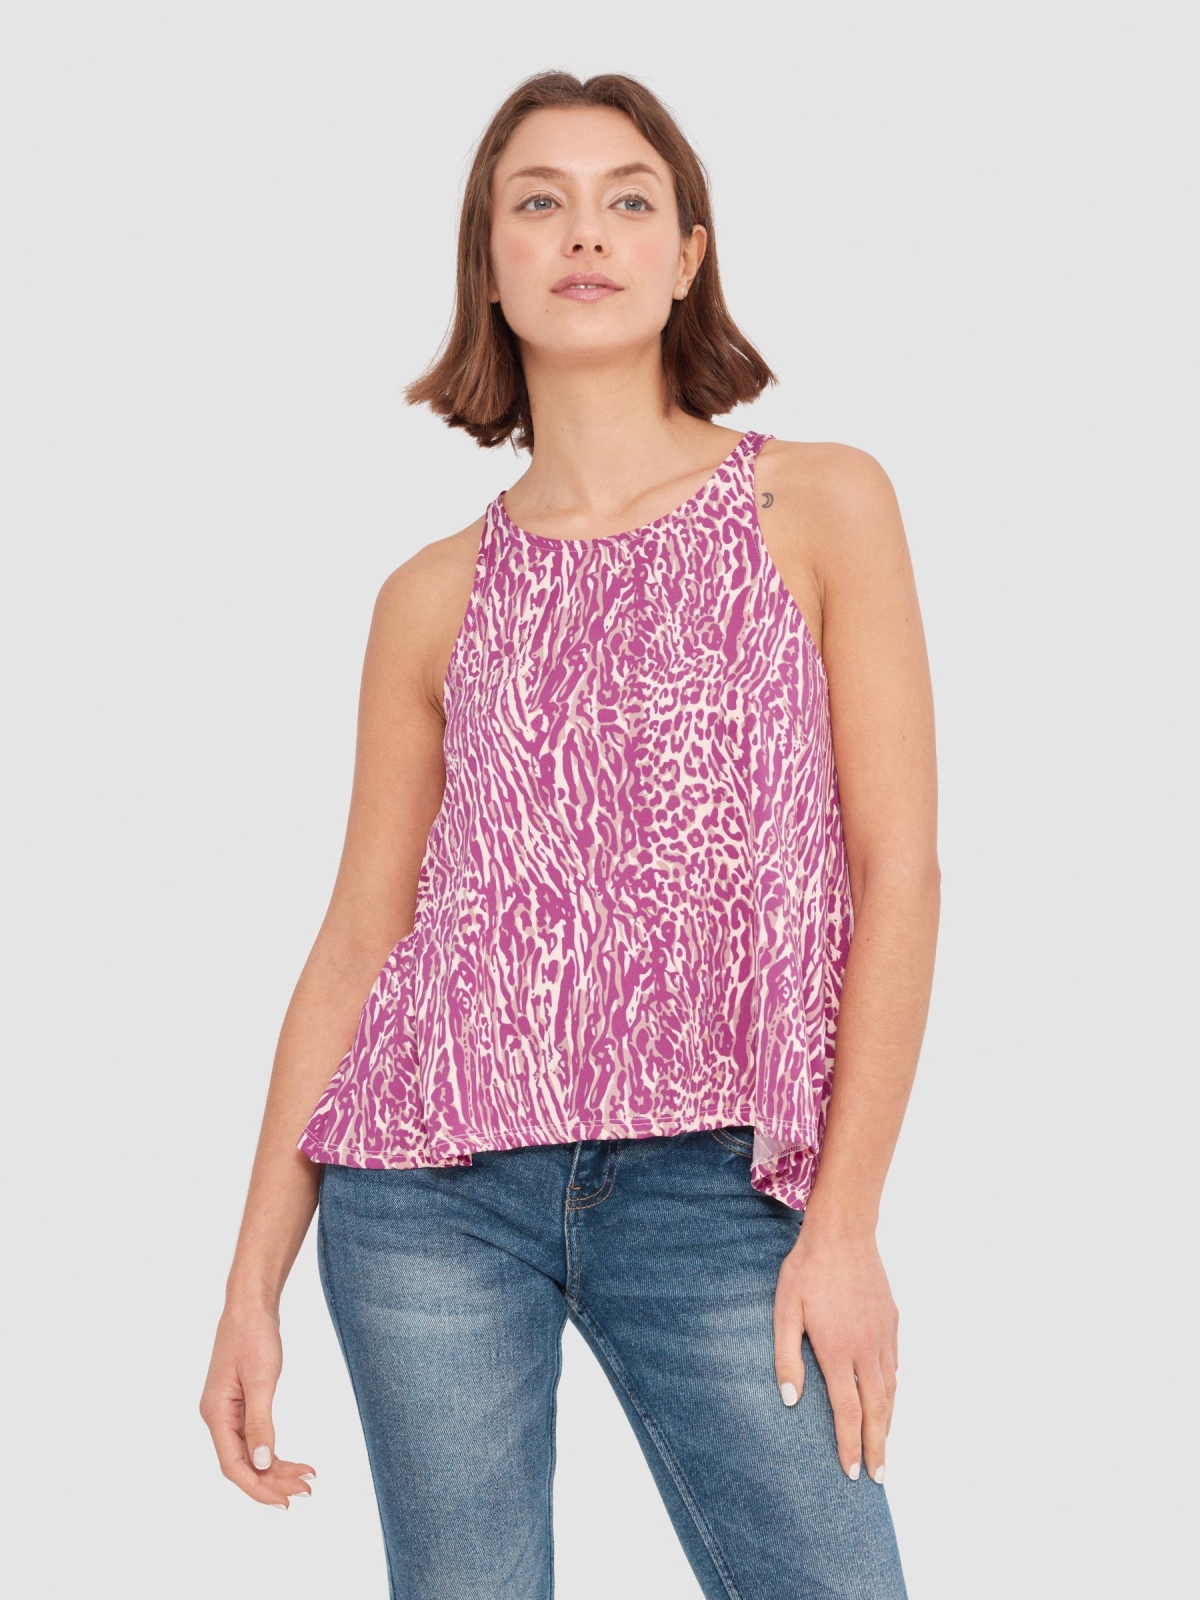 Flowing cross back t-shirt fuchsia middle front view